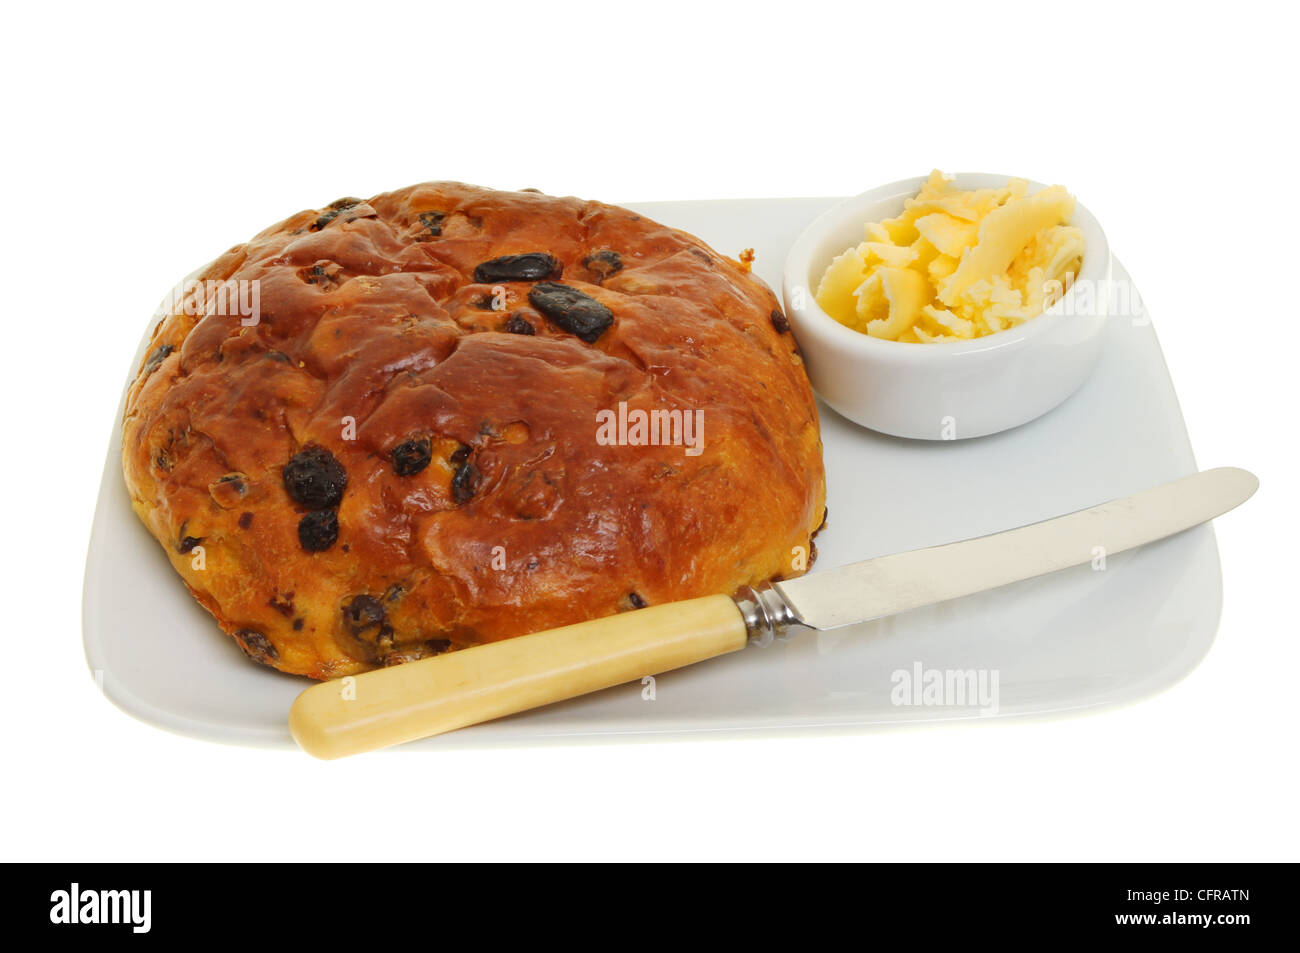 Saffron bun butter and a knife on a plate isolated against white Stock Photo